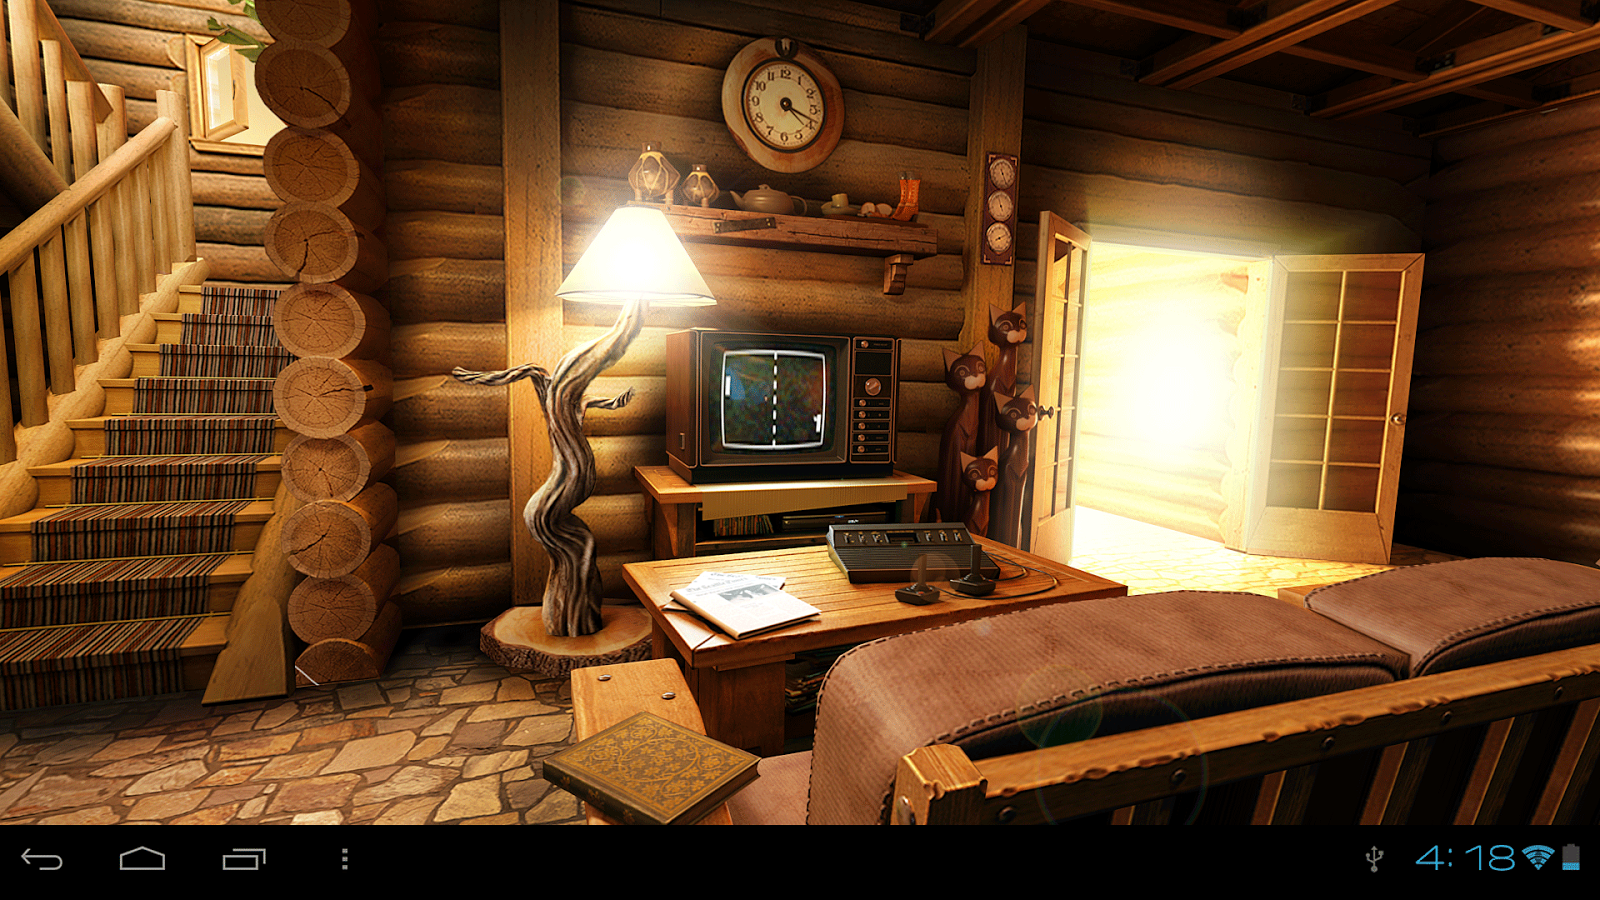 My Log Home 3D wallpaper FREE   Android Apps on Google Play 1600x900